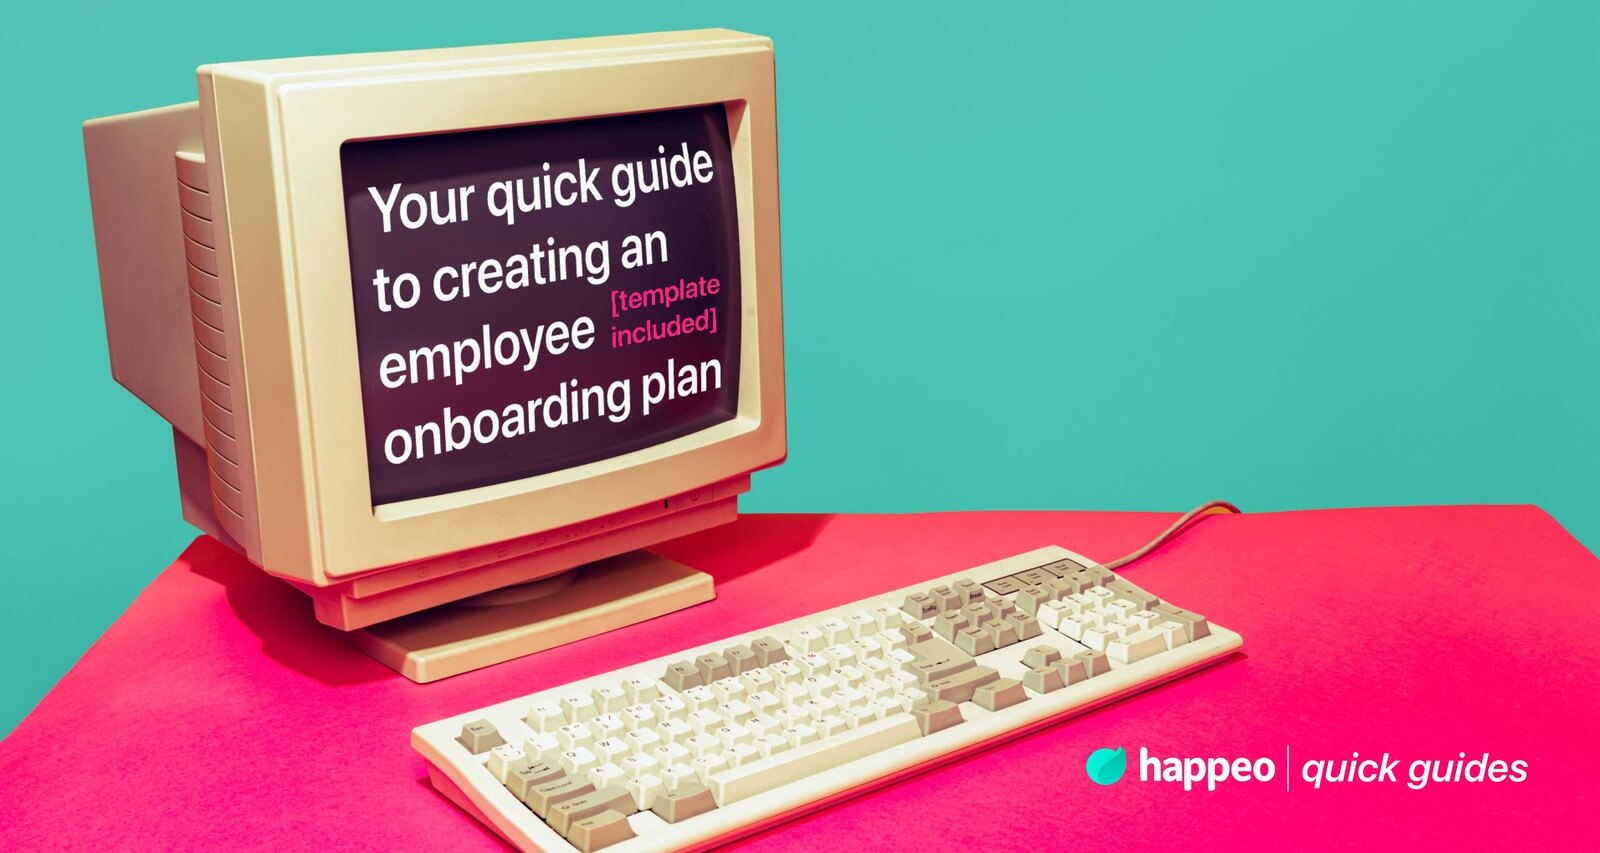 Your quick guide to creating an employee onboarding plan [incl. template]